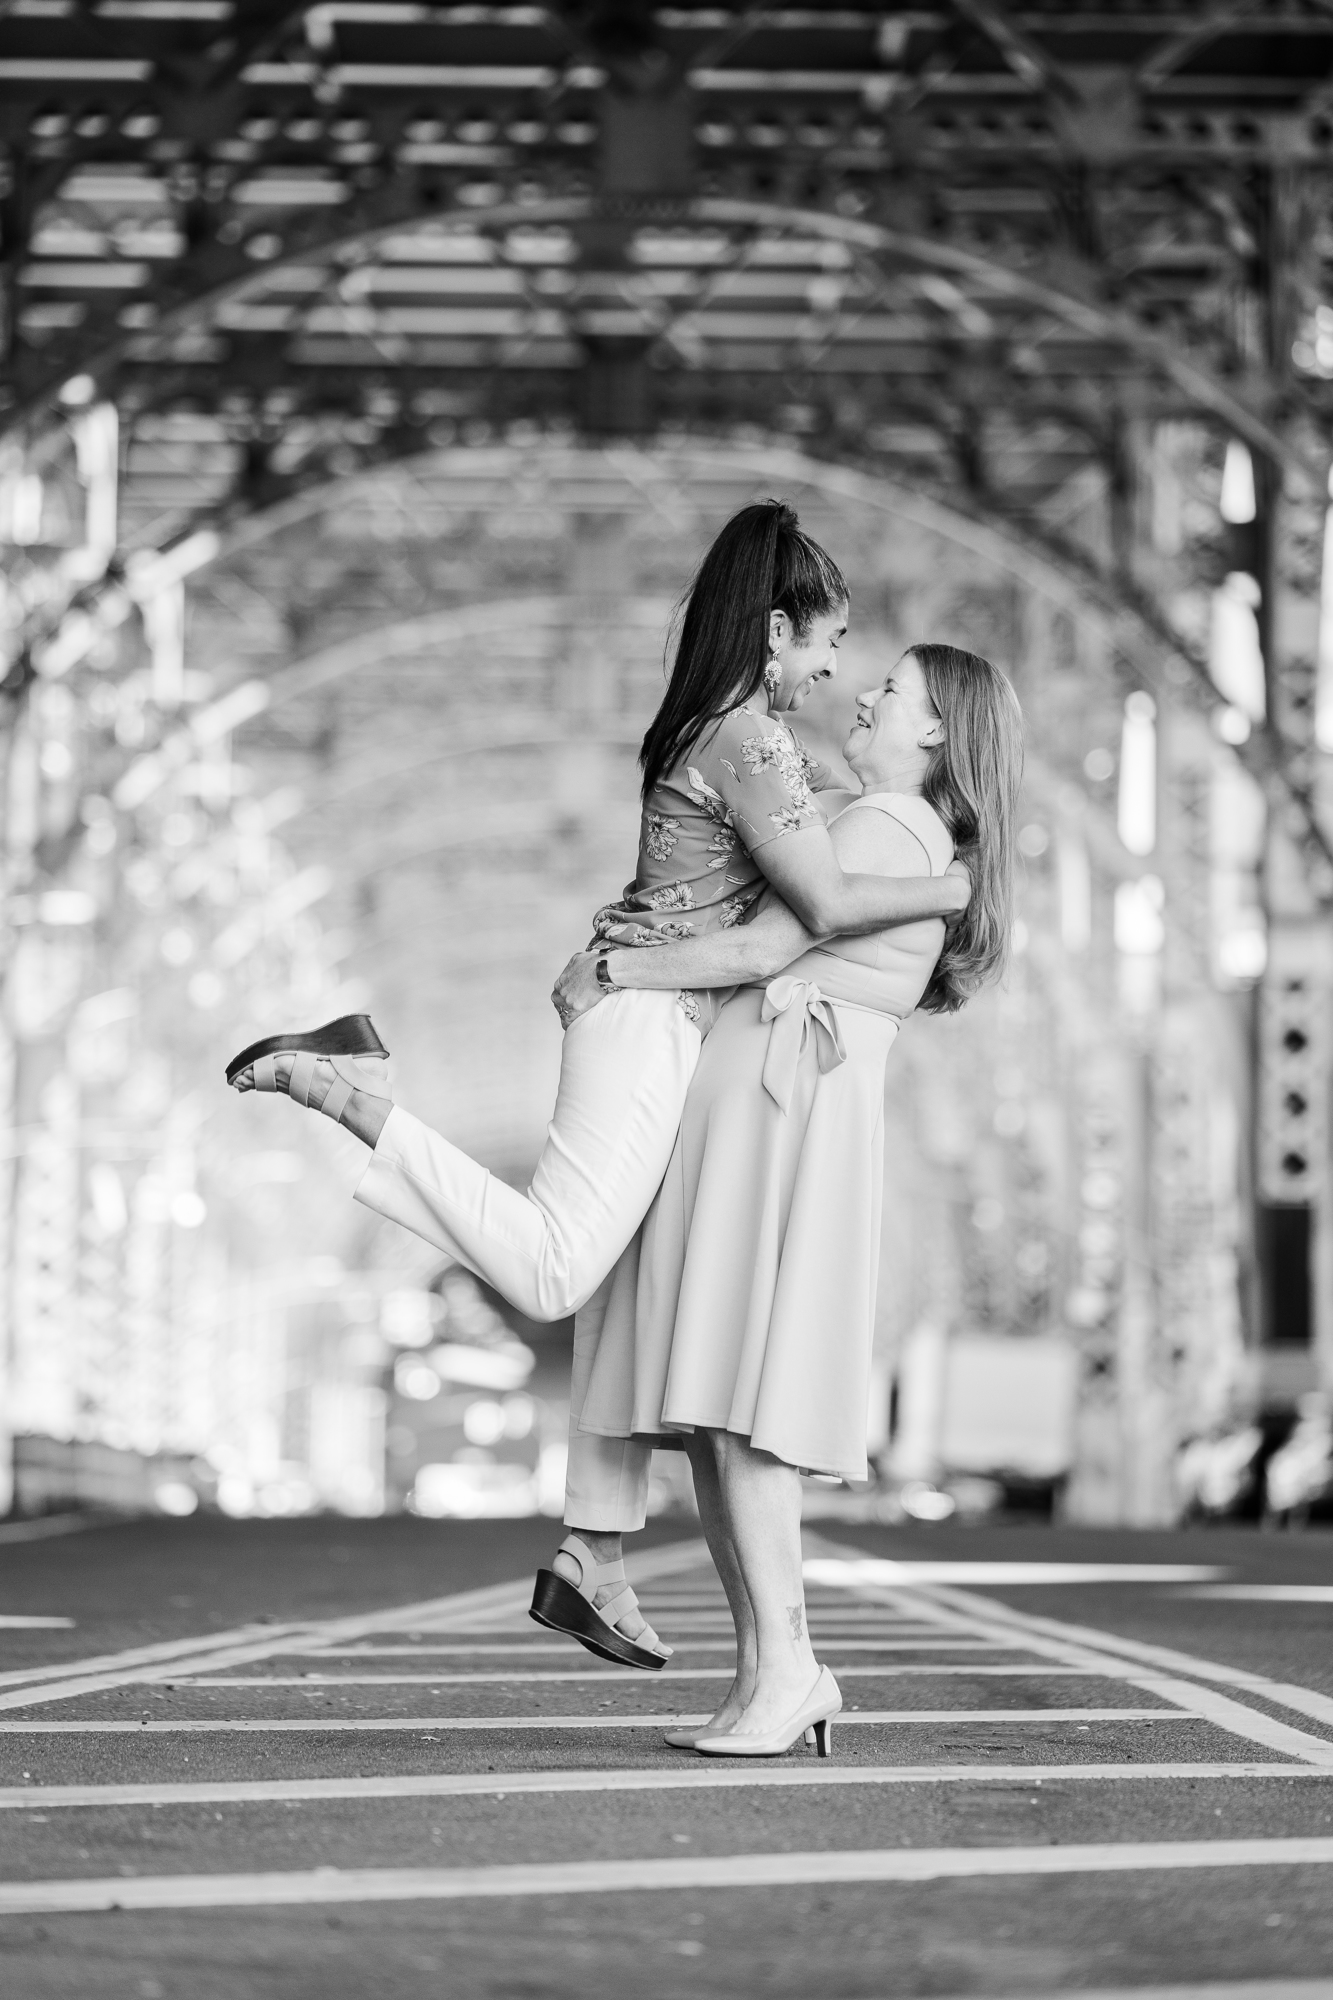 Personal Engagement Photo Shoot in Harlem, New York